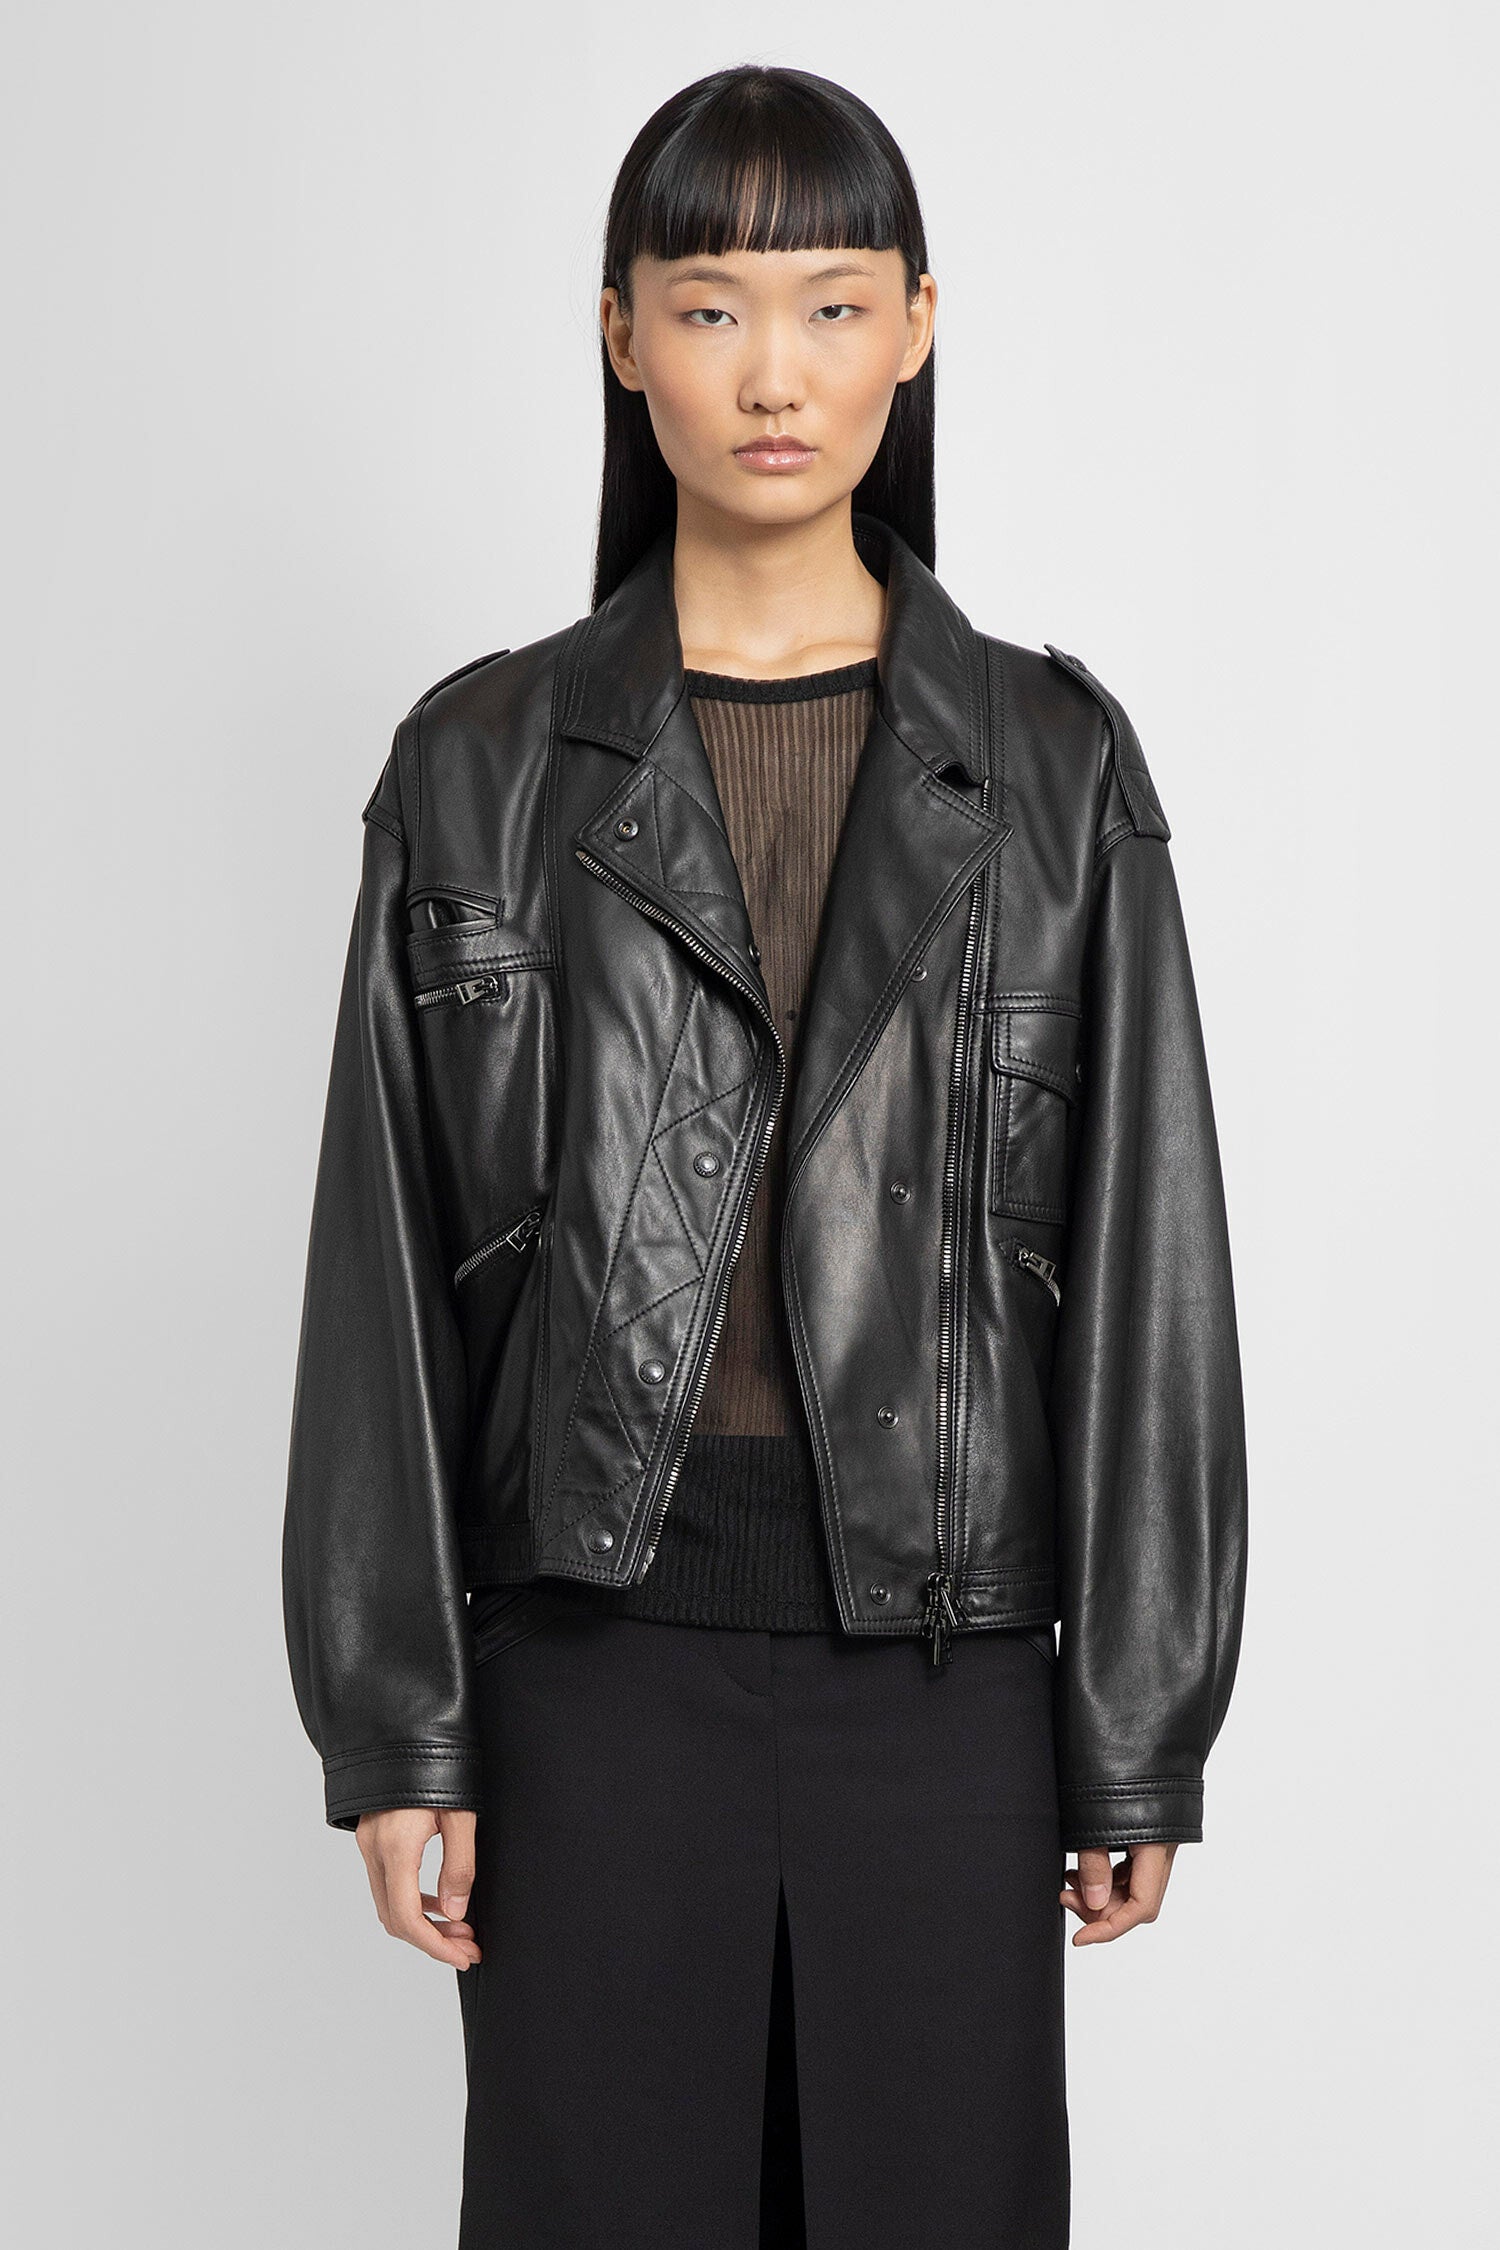 Tom Ford Woman Black Leather Jackets | ModeSens